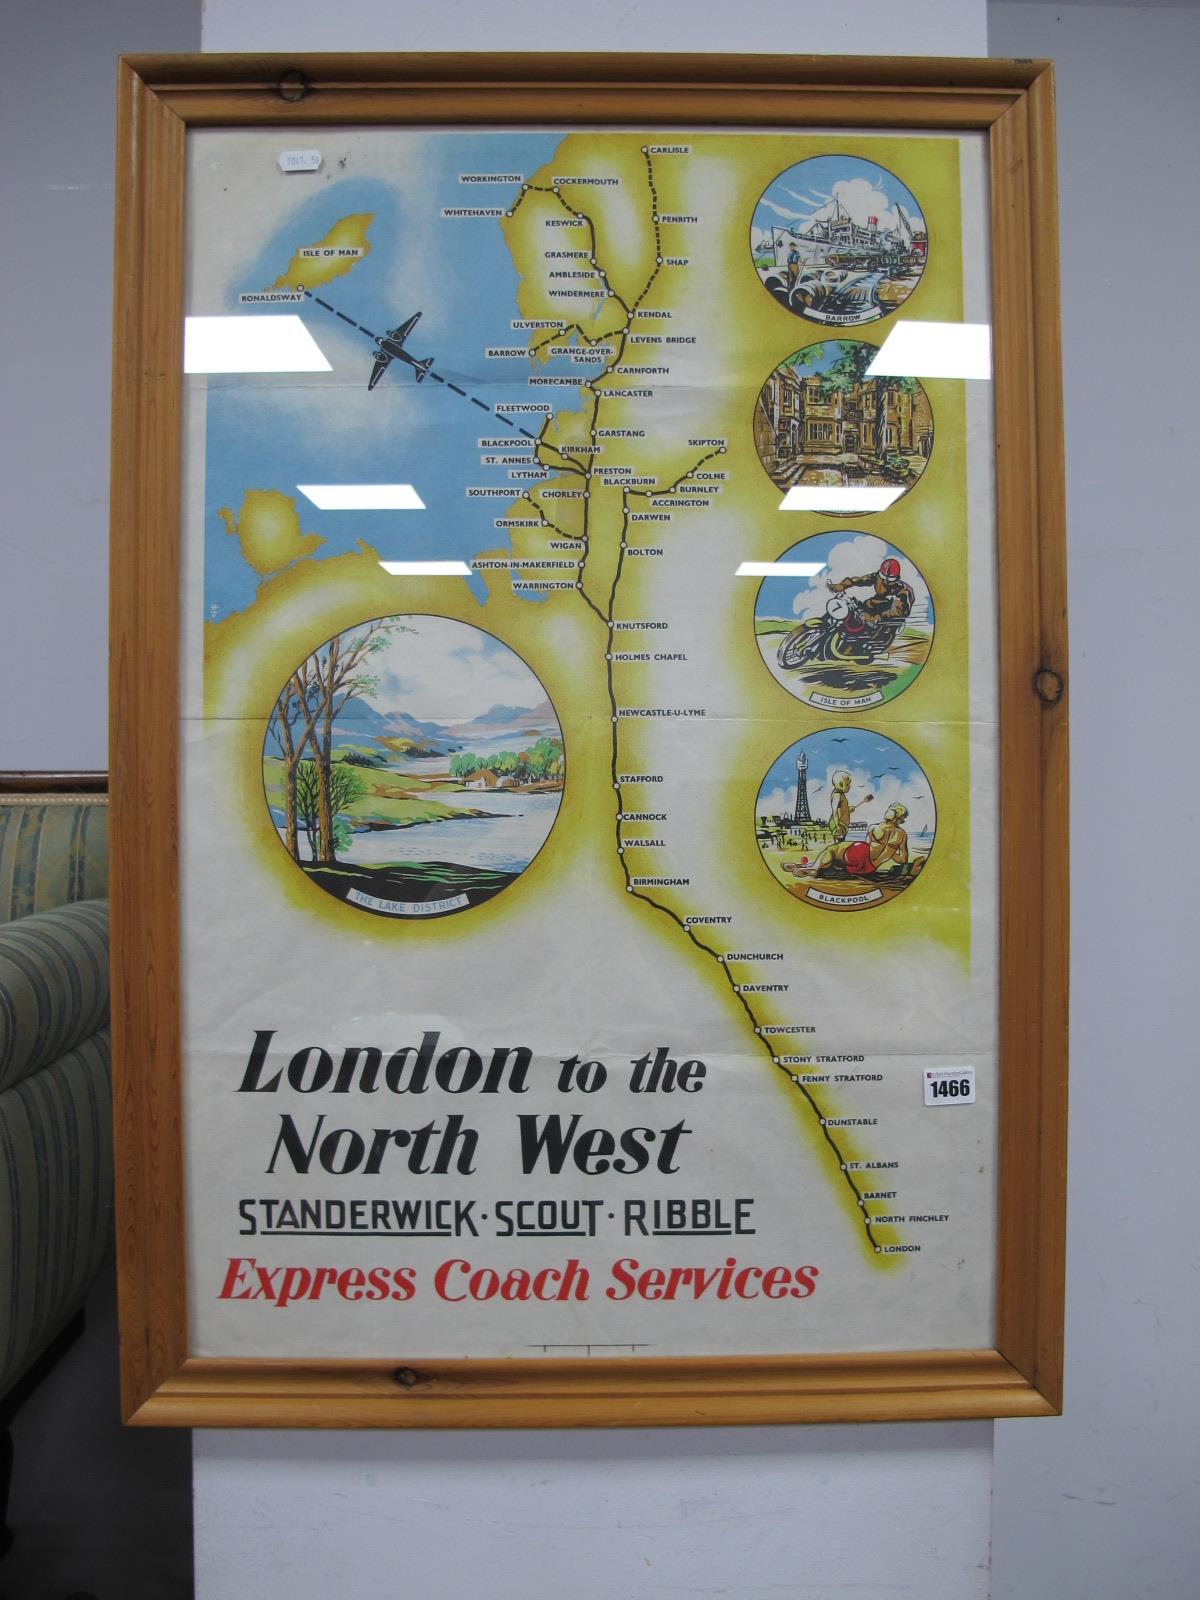 An Original Circa 1950's Travel Poster For 'Express Coach Services', showing a map of London to